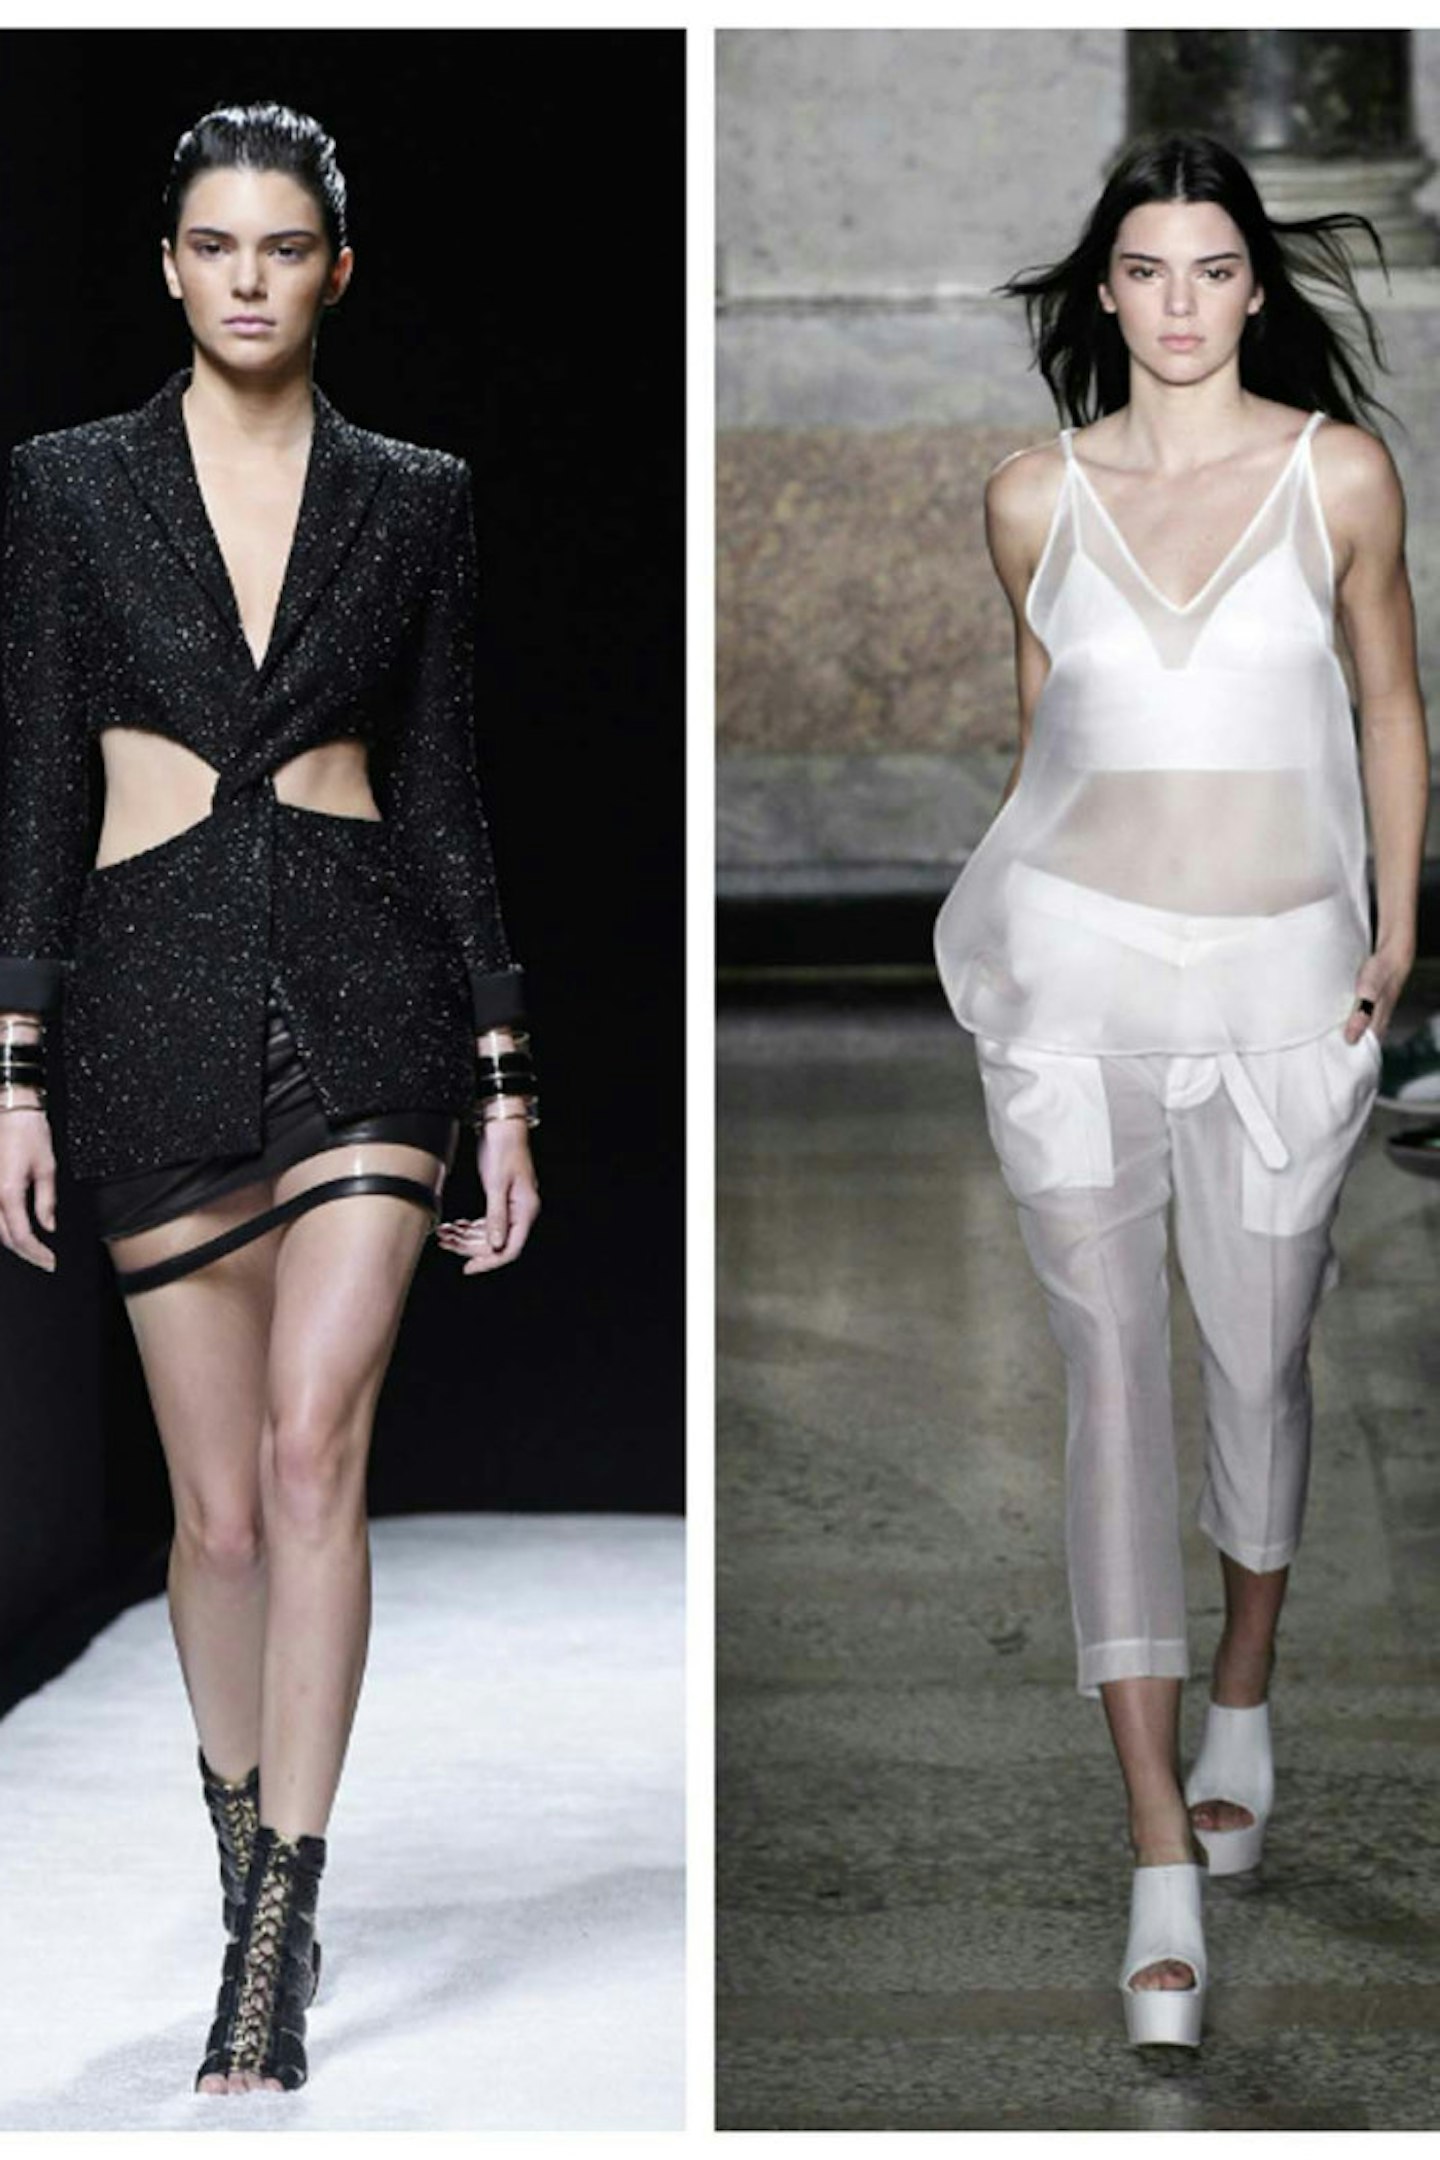 GALLERY > See Kendall's best catwalk moments